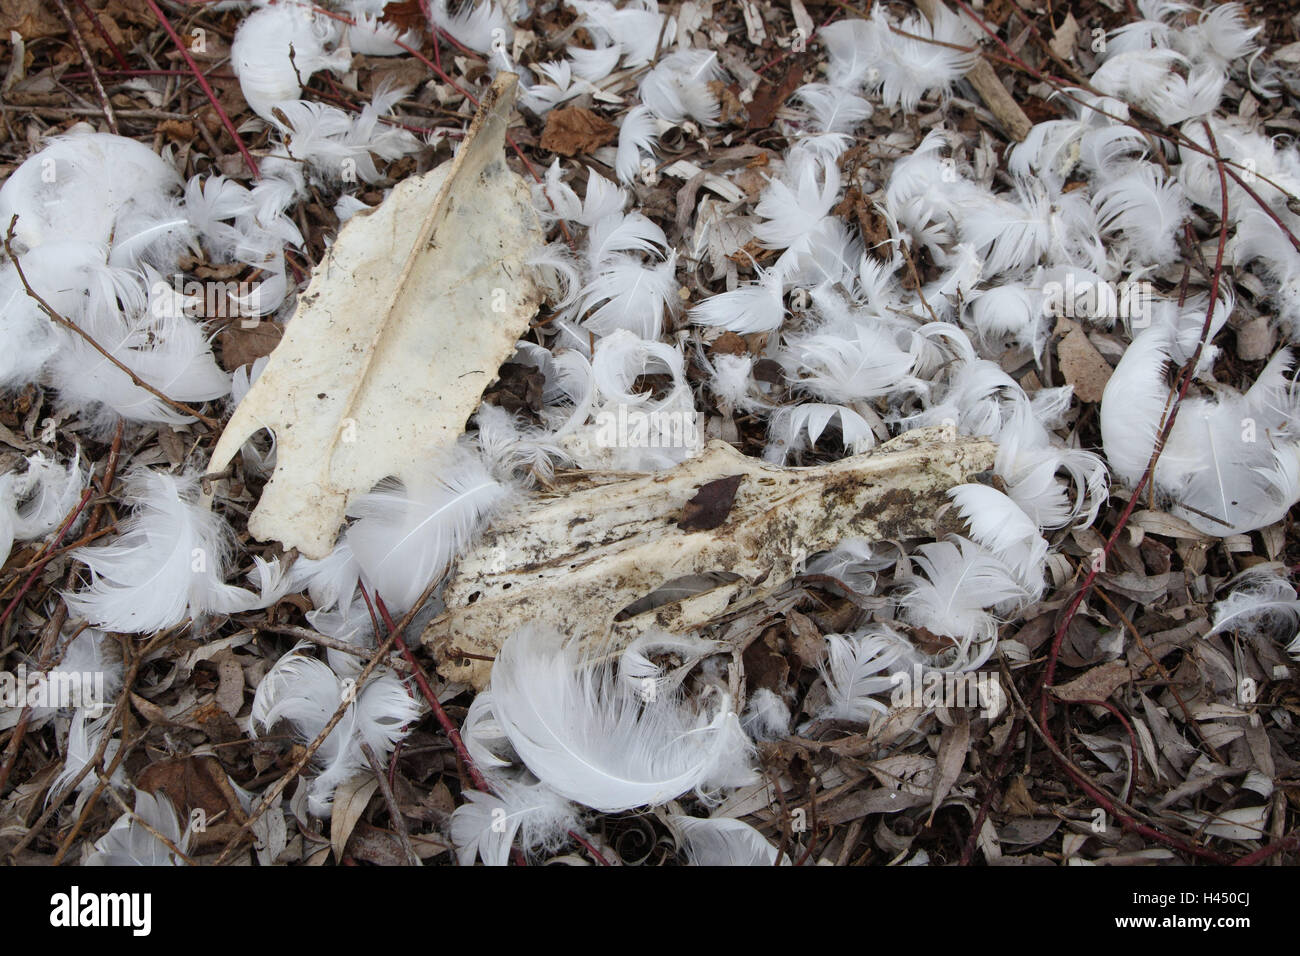 Hump swan, remains, feathers, feet, animal, killed, deadly, shoots, disassembles, rests, wild animal, swan, forest floor, foliage, Stock Photo